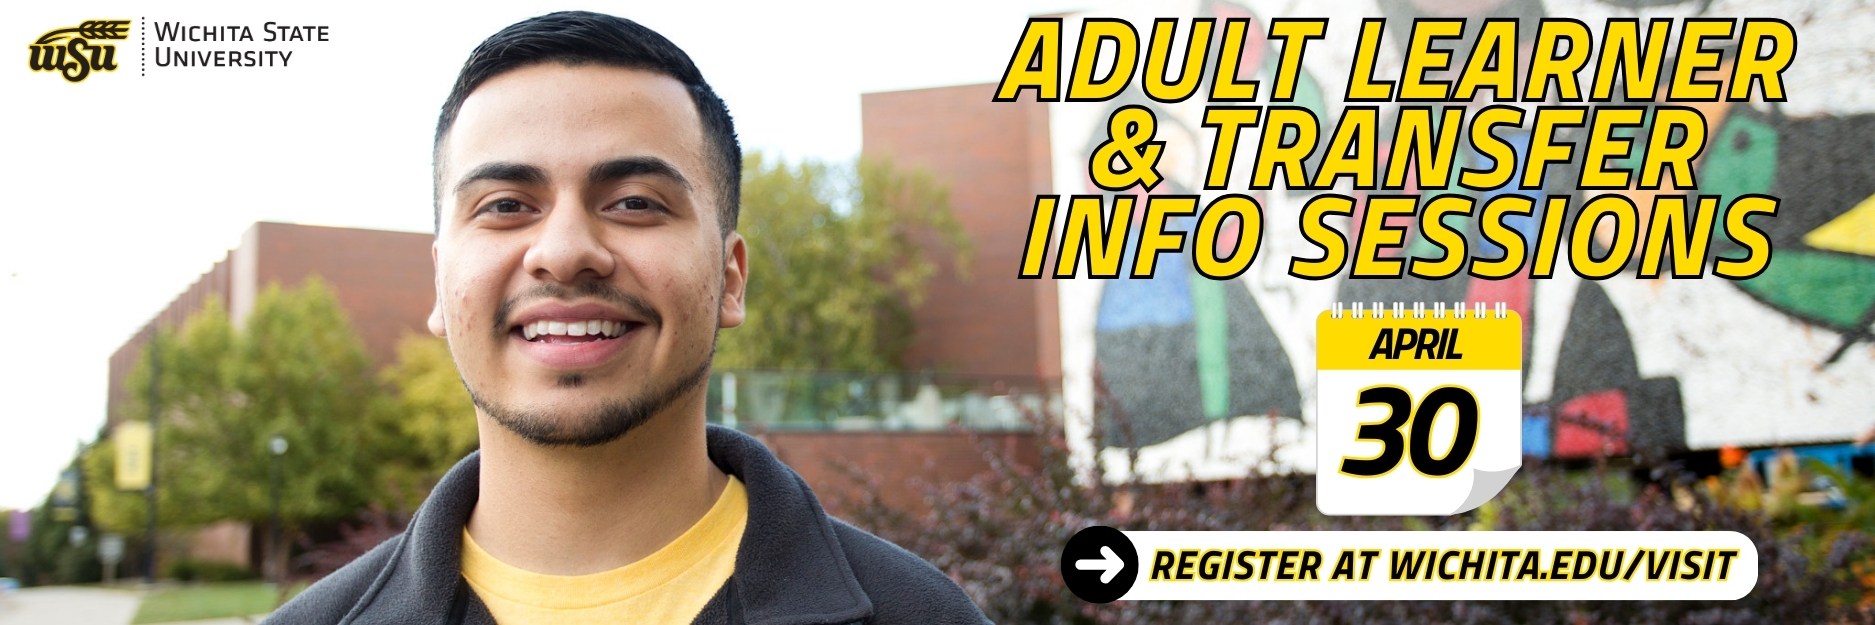 Adult Learner and Transfer Student Info Session